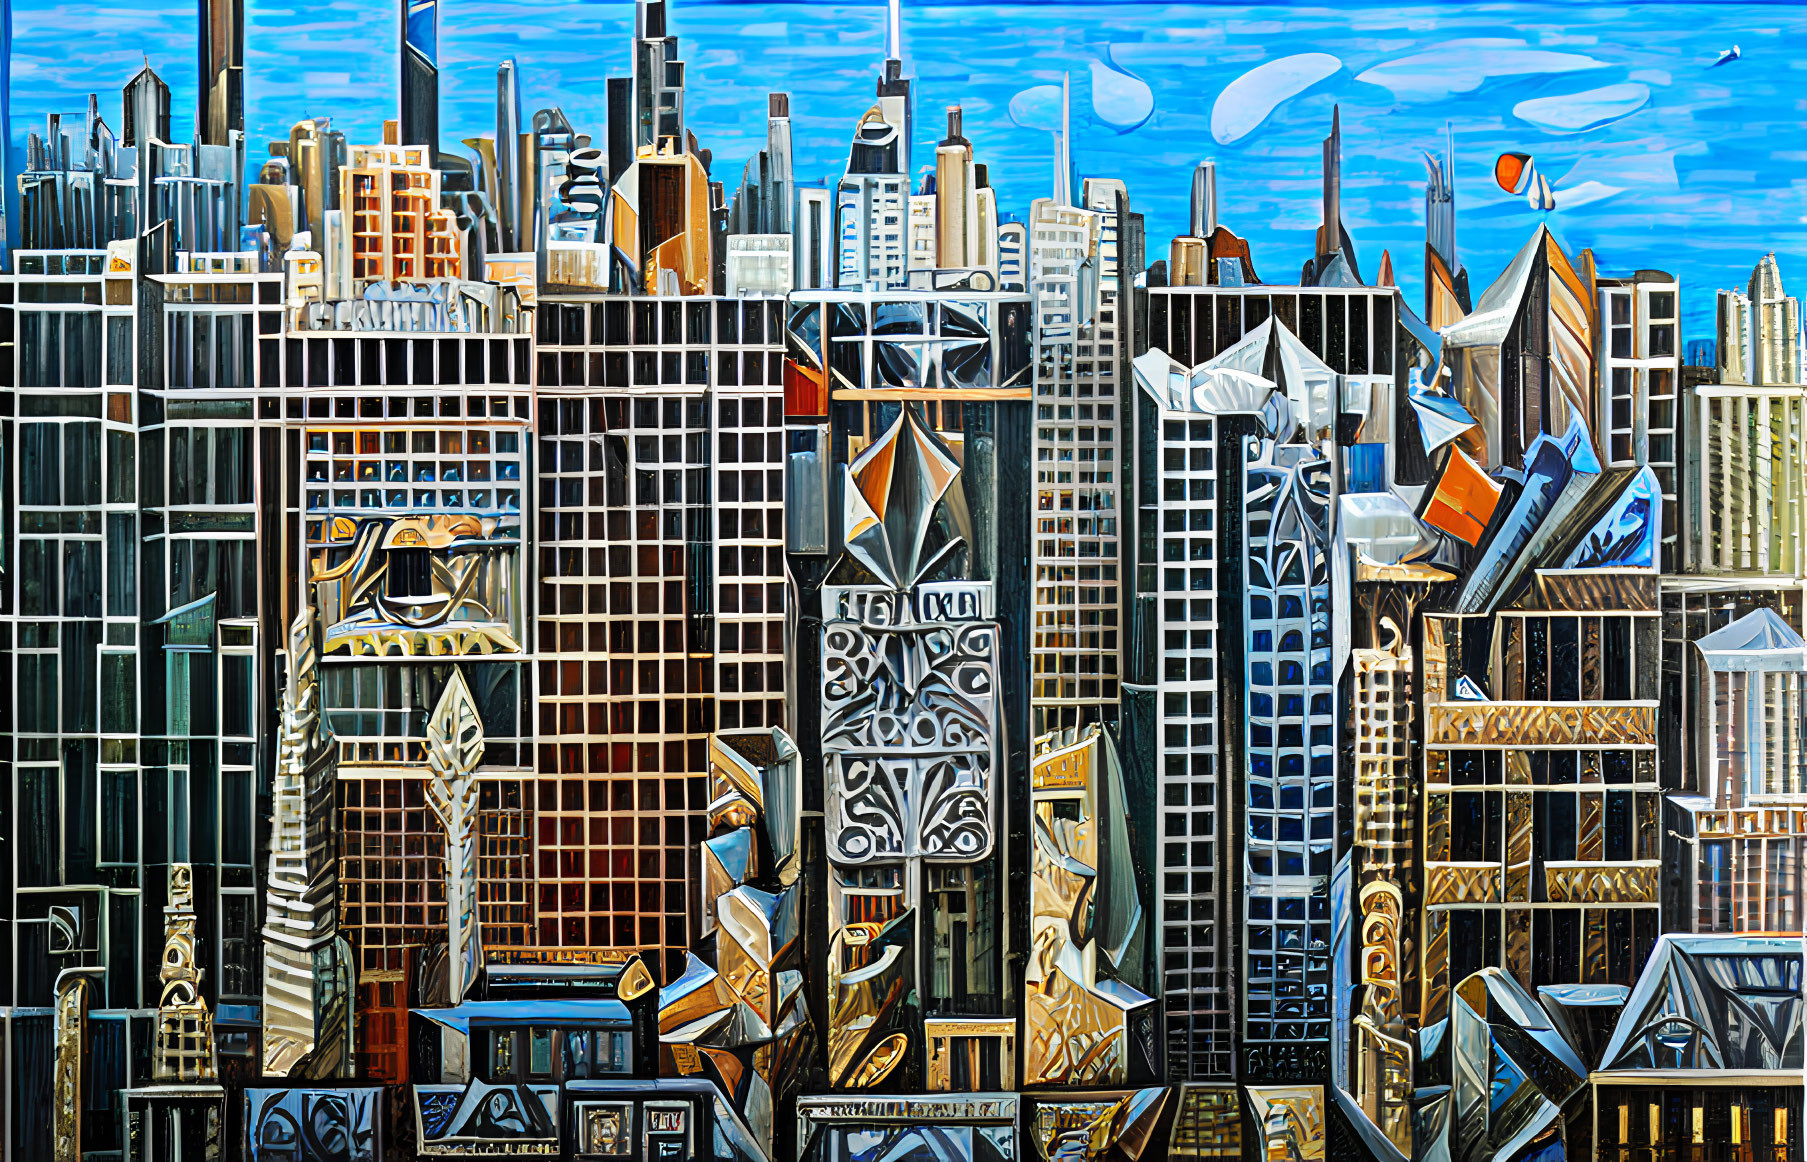 Abstract urban skyline painting with colorful, geometric skyscrapers under a blue sky.